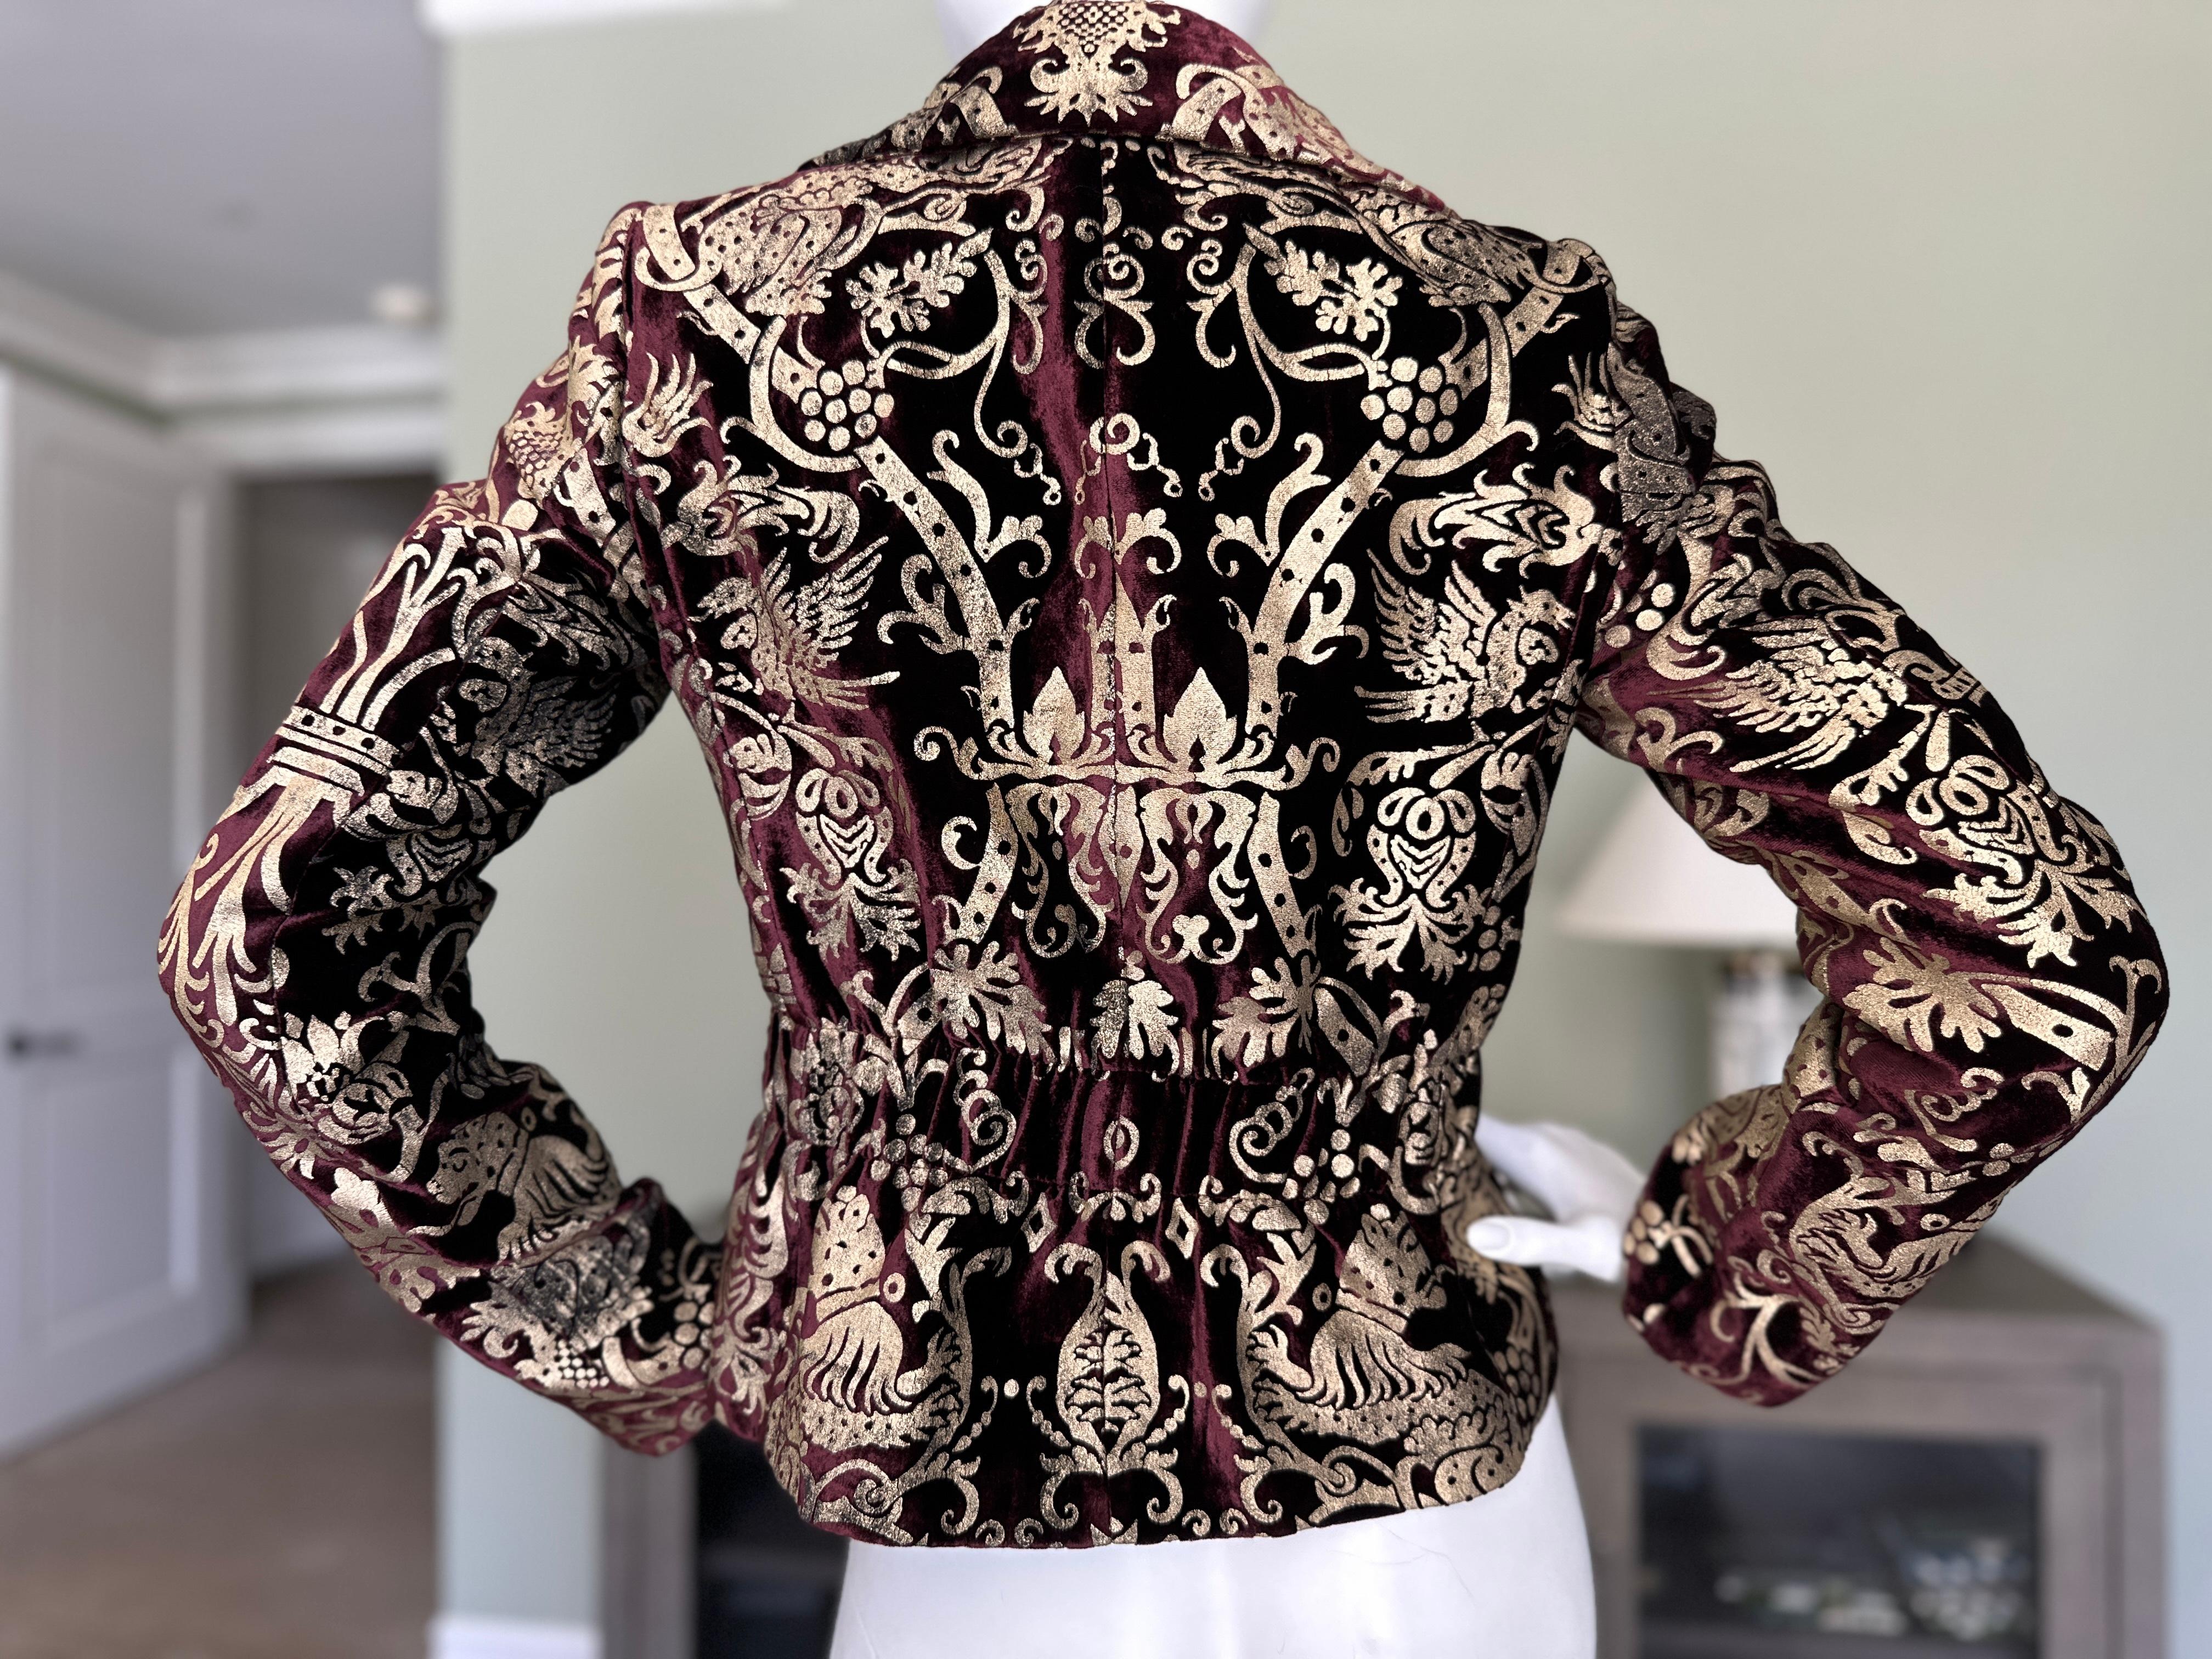 Roberto Cavalli Collectable Fortuny Style Rampant Lion Devore Velvet Jacket  In Excellent Condition For Sale In Cloverdale, CA